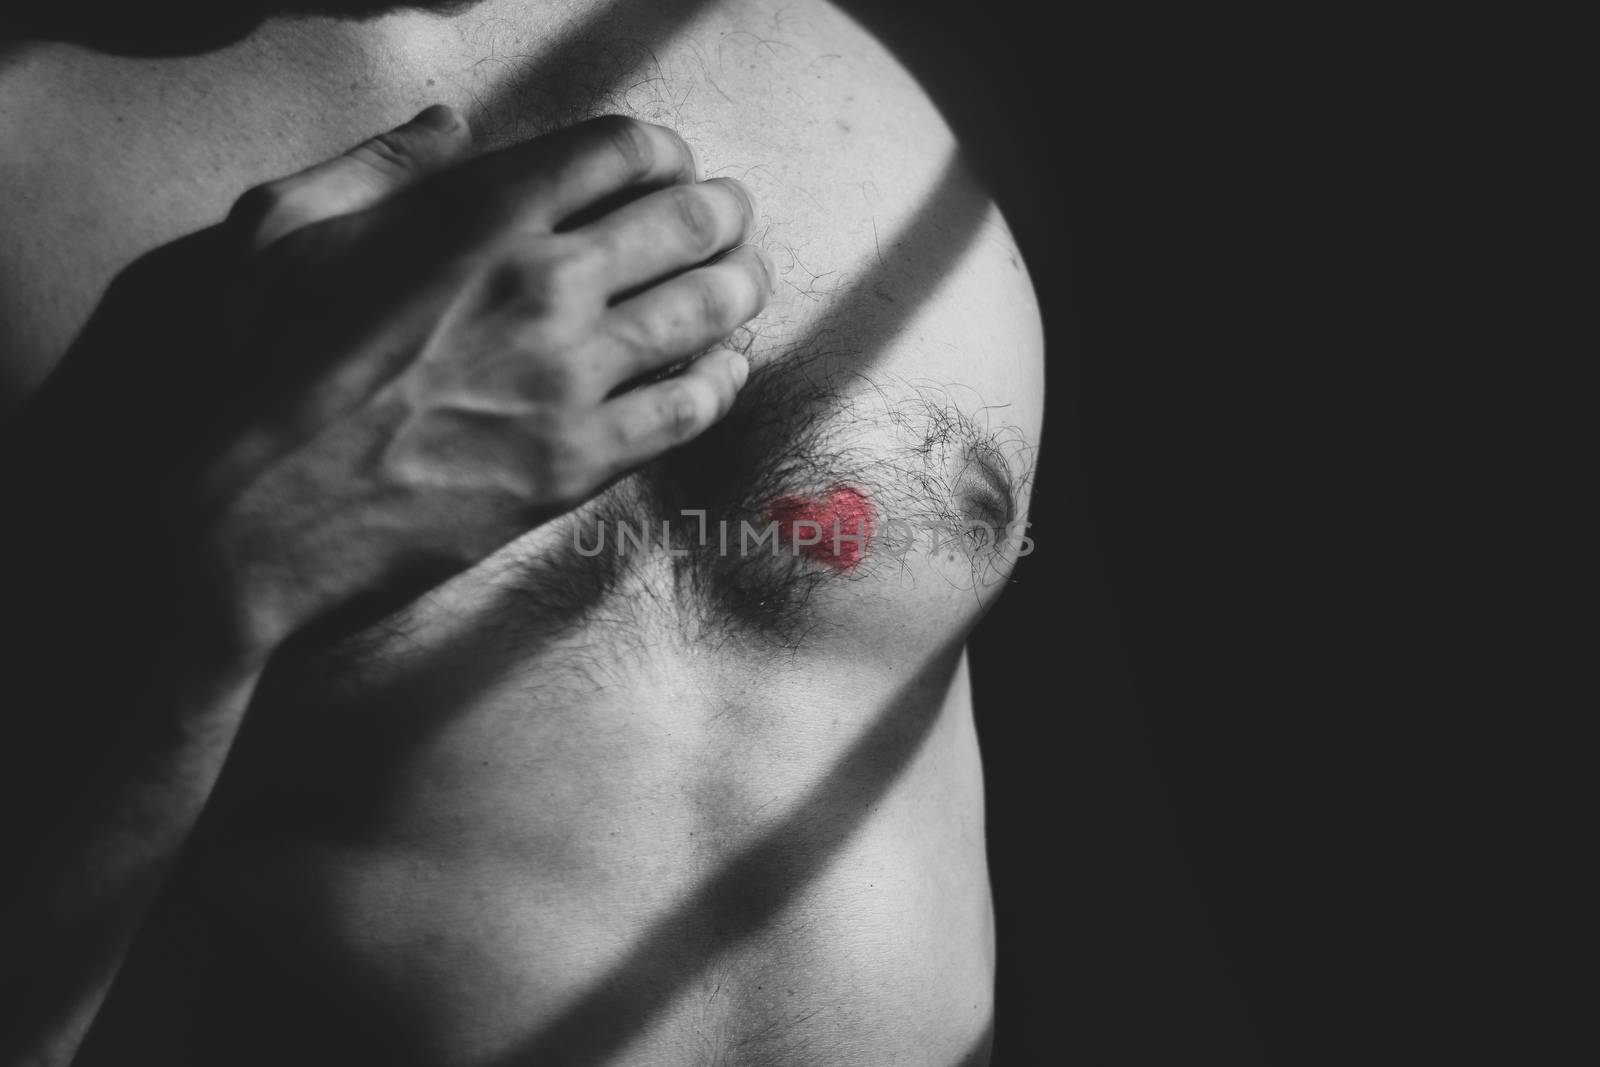 Heart Drawing on a man's Chest by Sonnet15